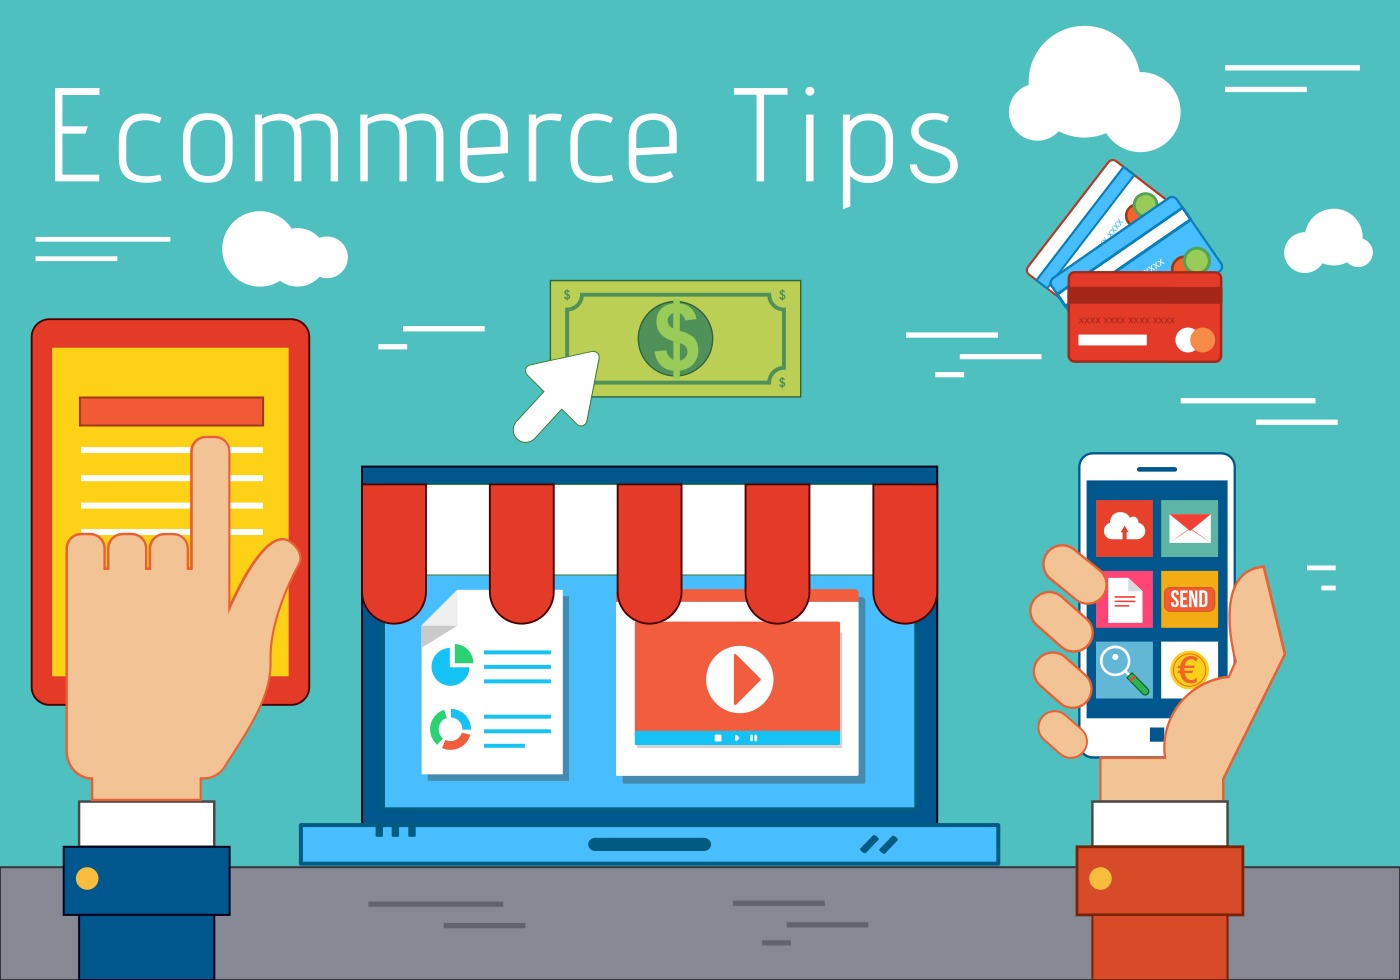 eCommerce consultant - Tips